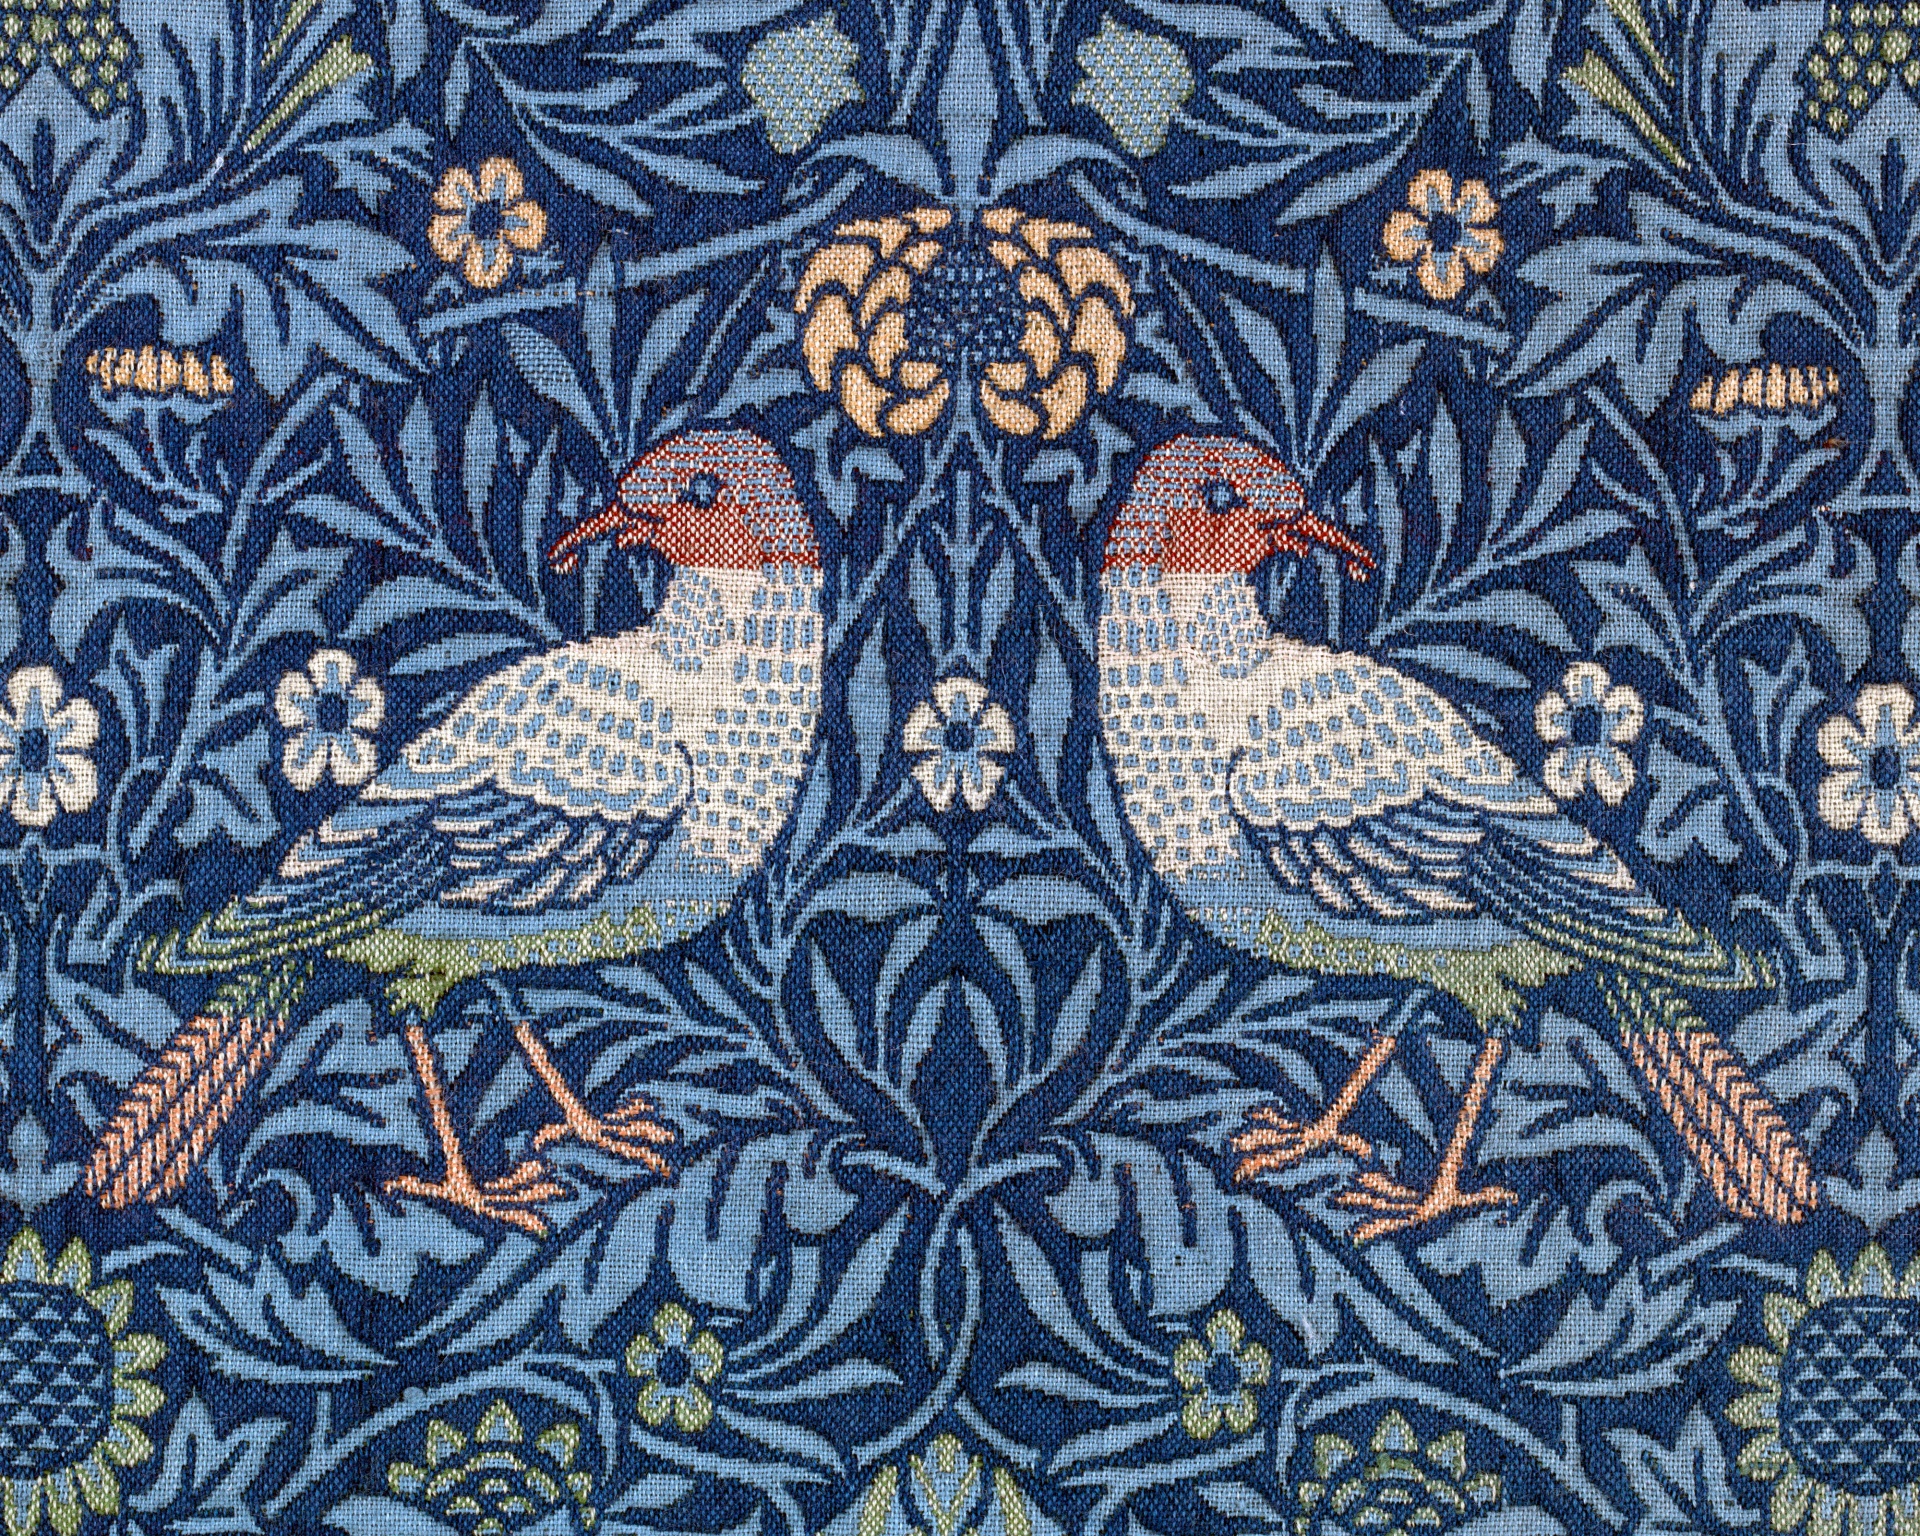 Vintage textile fabric of birds and flowers by William Morris